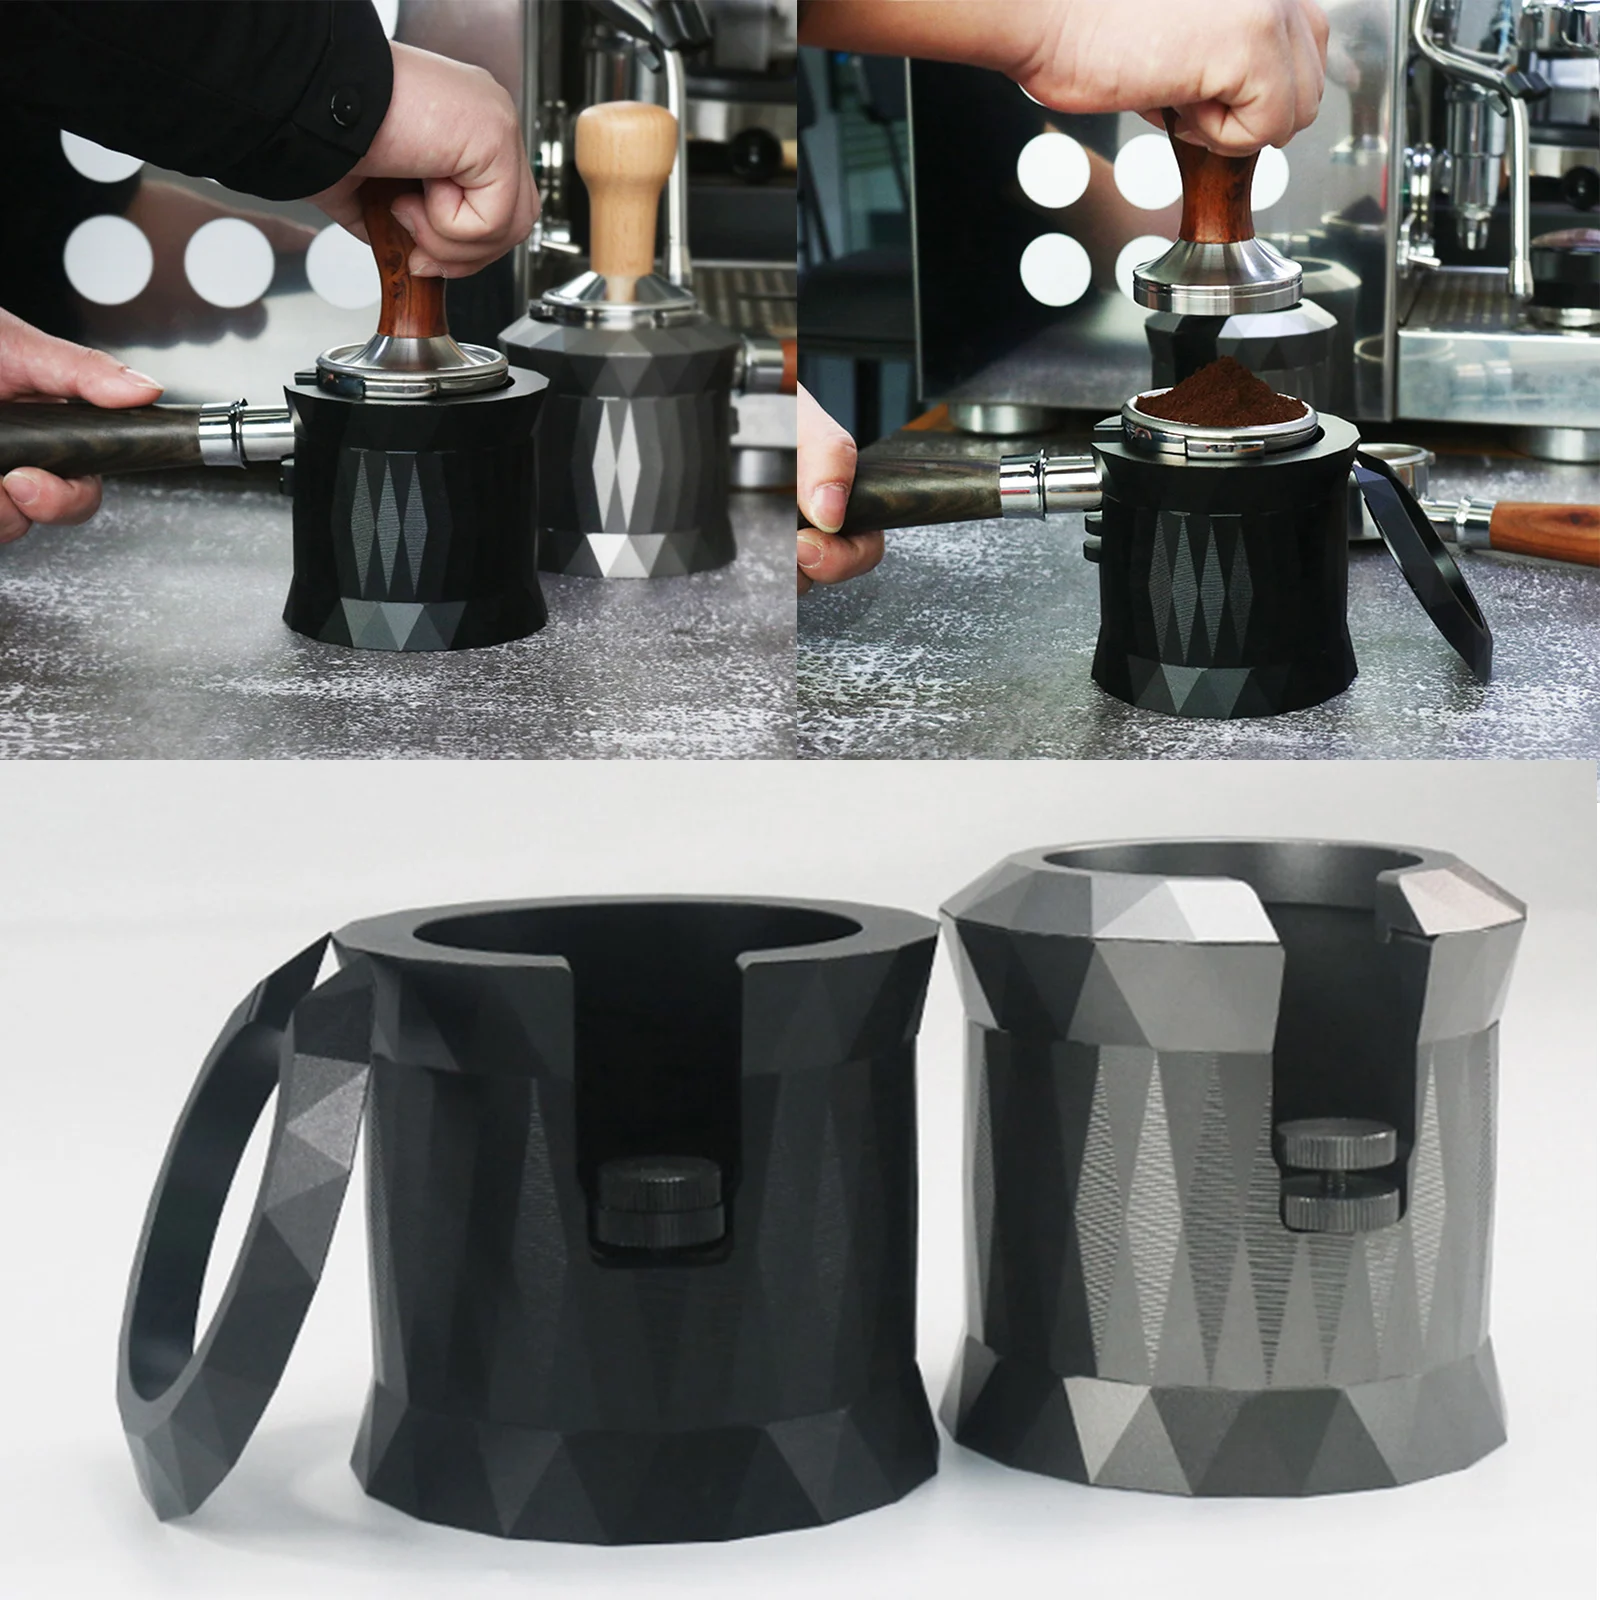 Portafilter Holder Seat Anodized Aluminum Alloy Coffee Handle Tamper Station Fit for 51mm / 54mm / 58mm Portafilters